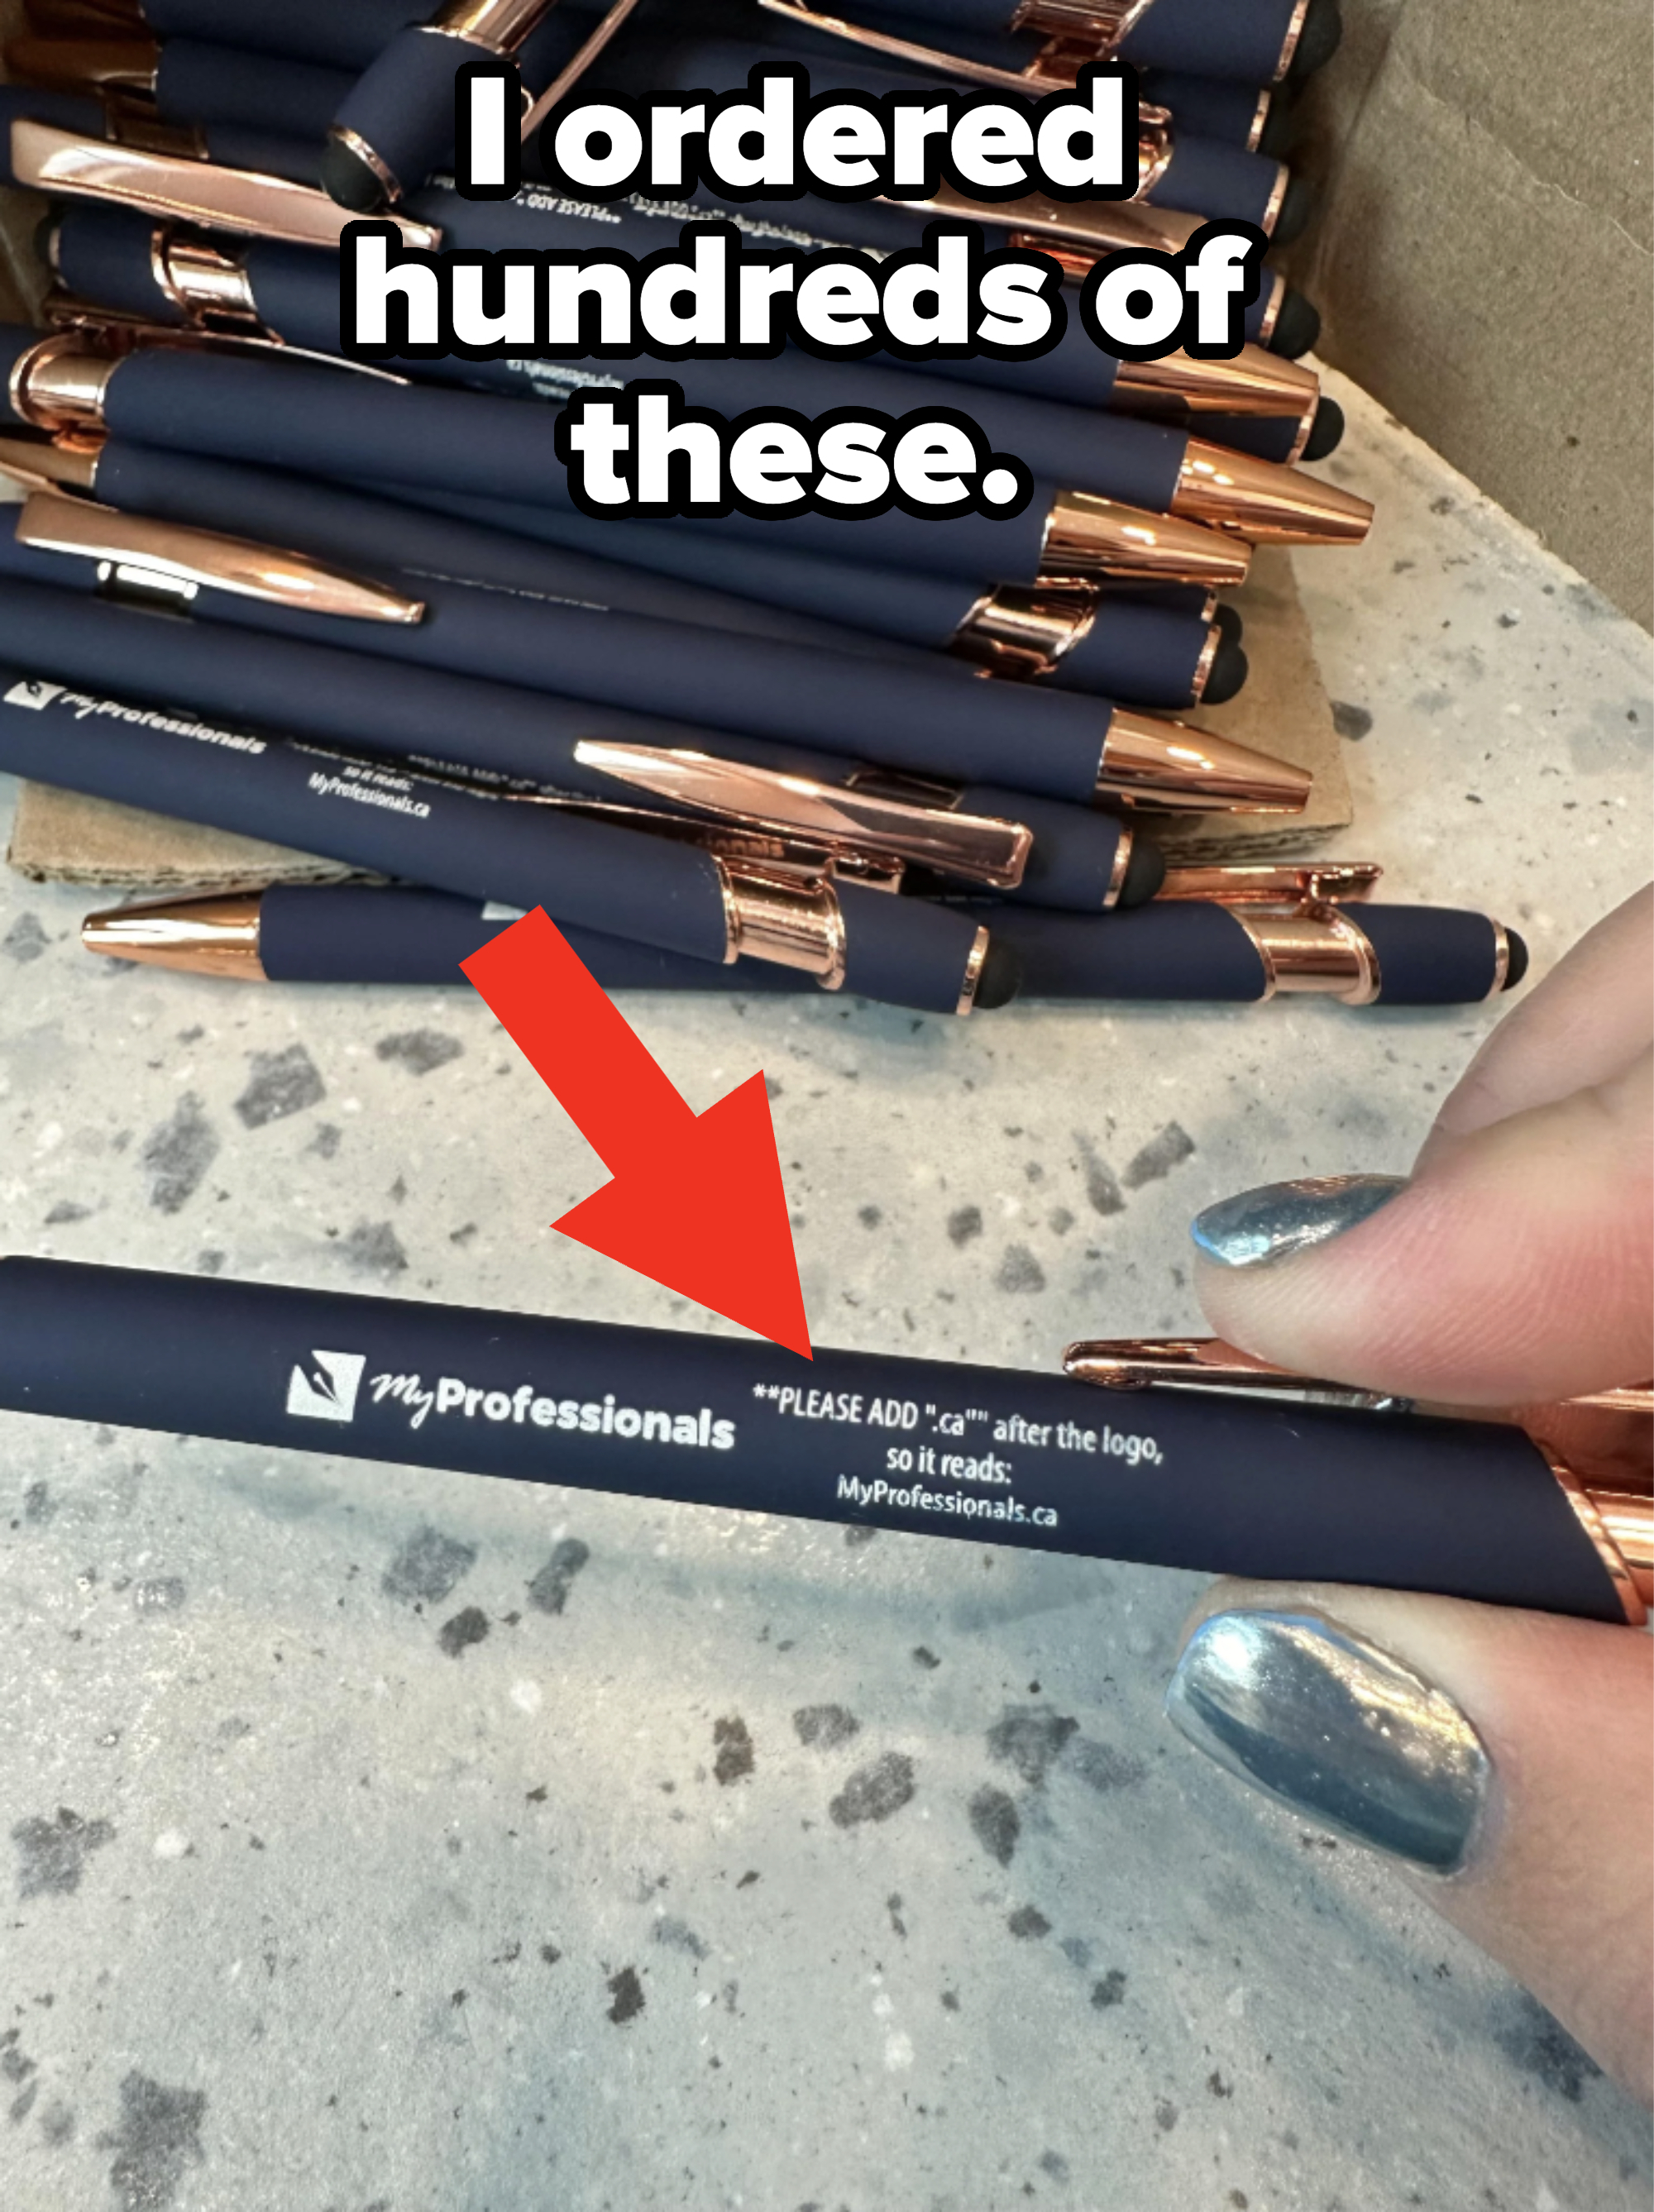 Pens with inscription that consists of instructions for what they&#x27;re supposed to say: &quot;Please add .ca&quot; after the logo so it reads: MyProfessionals.ca&quot;